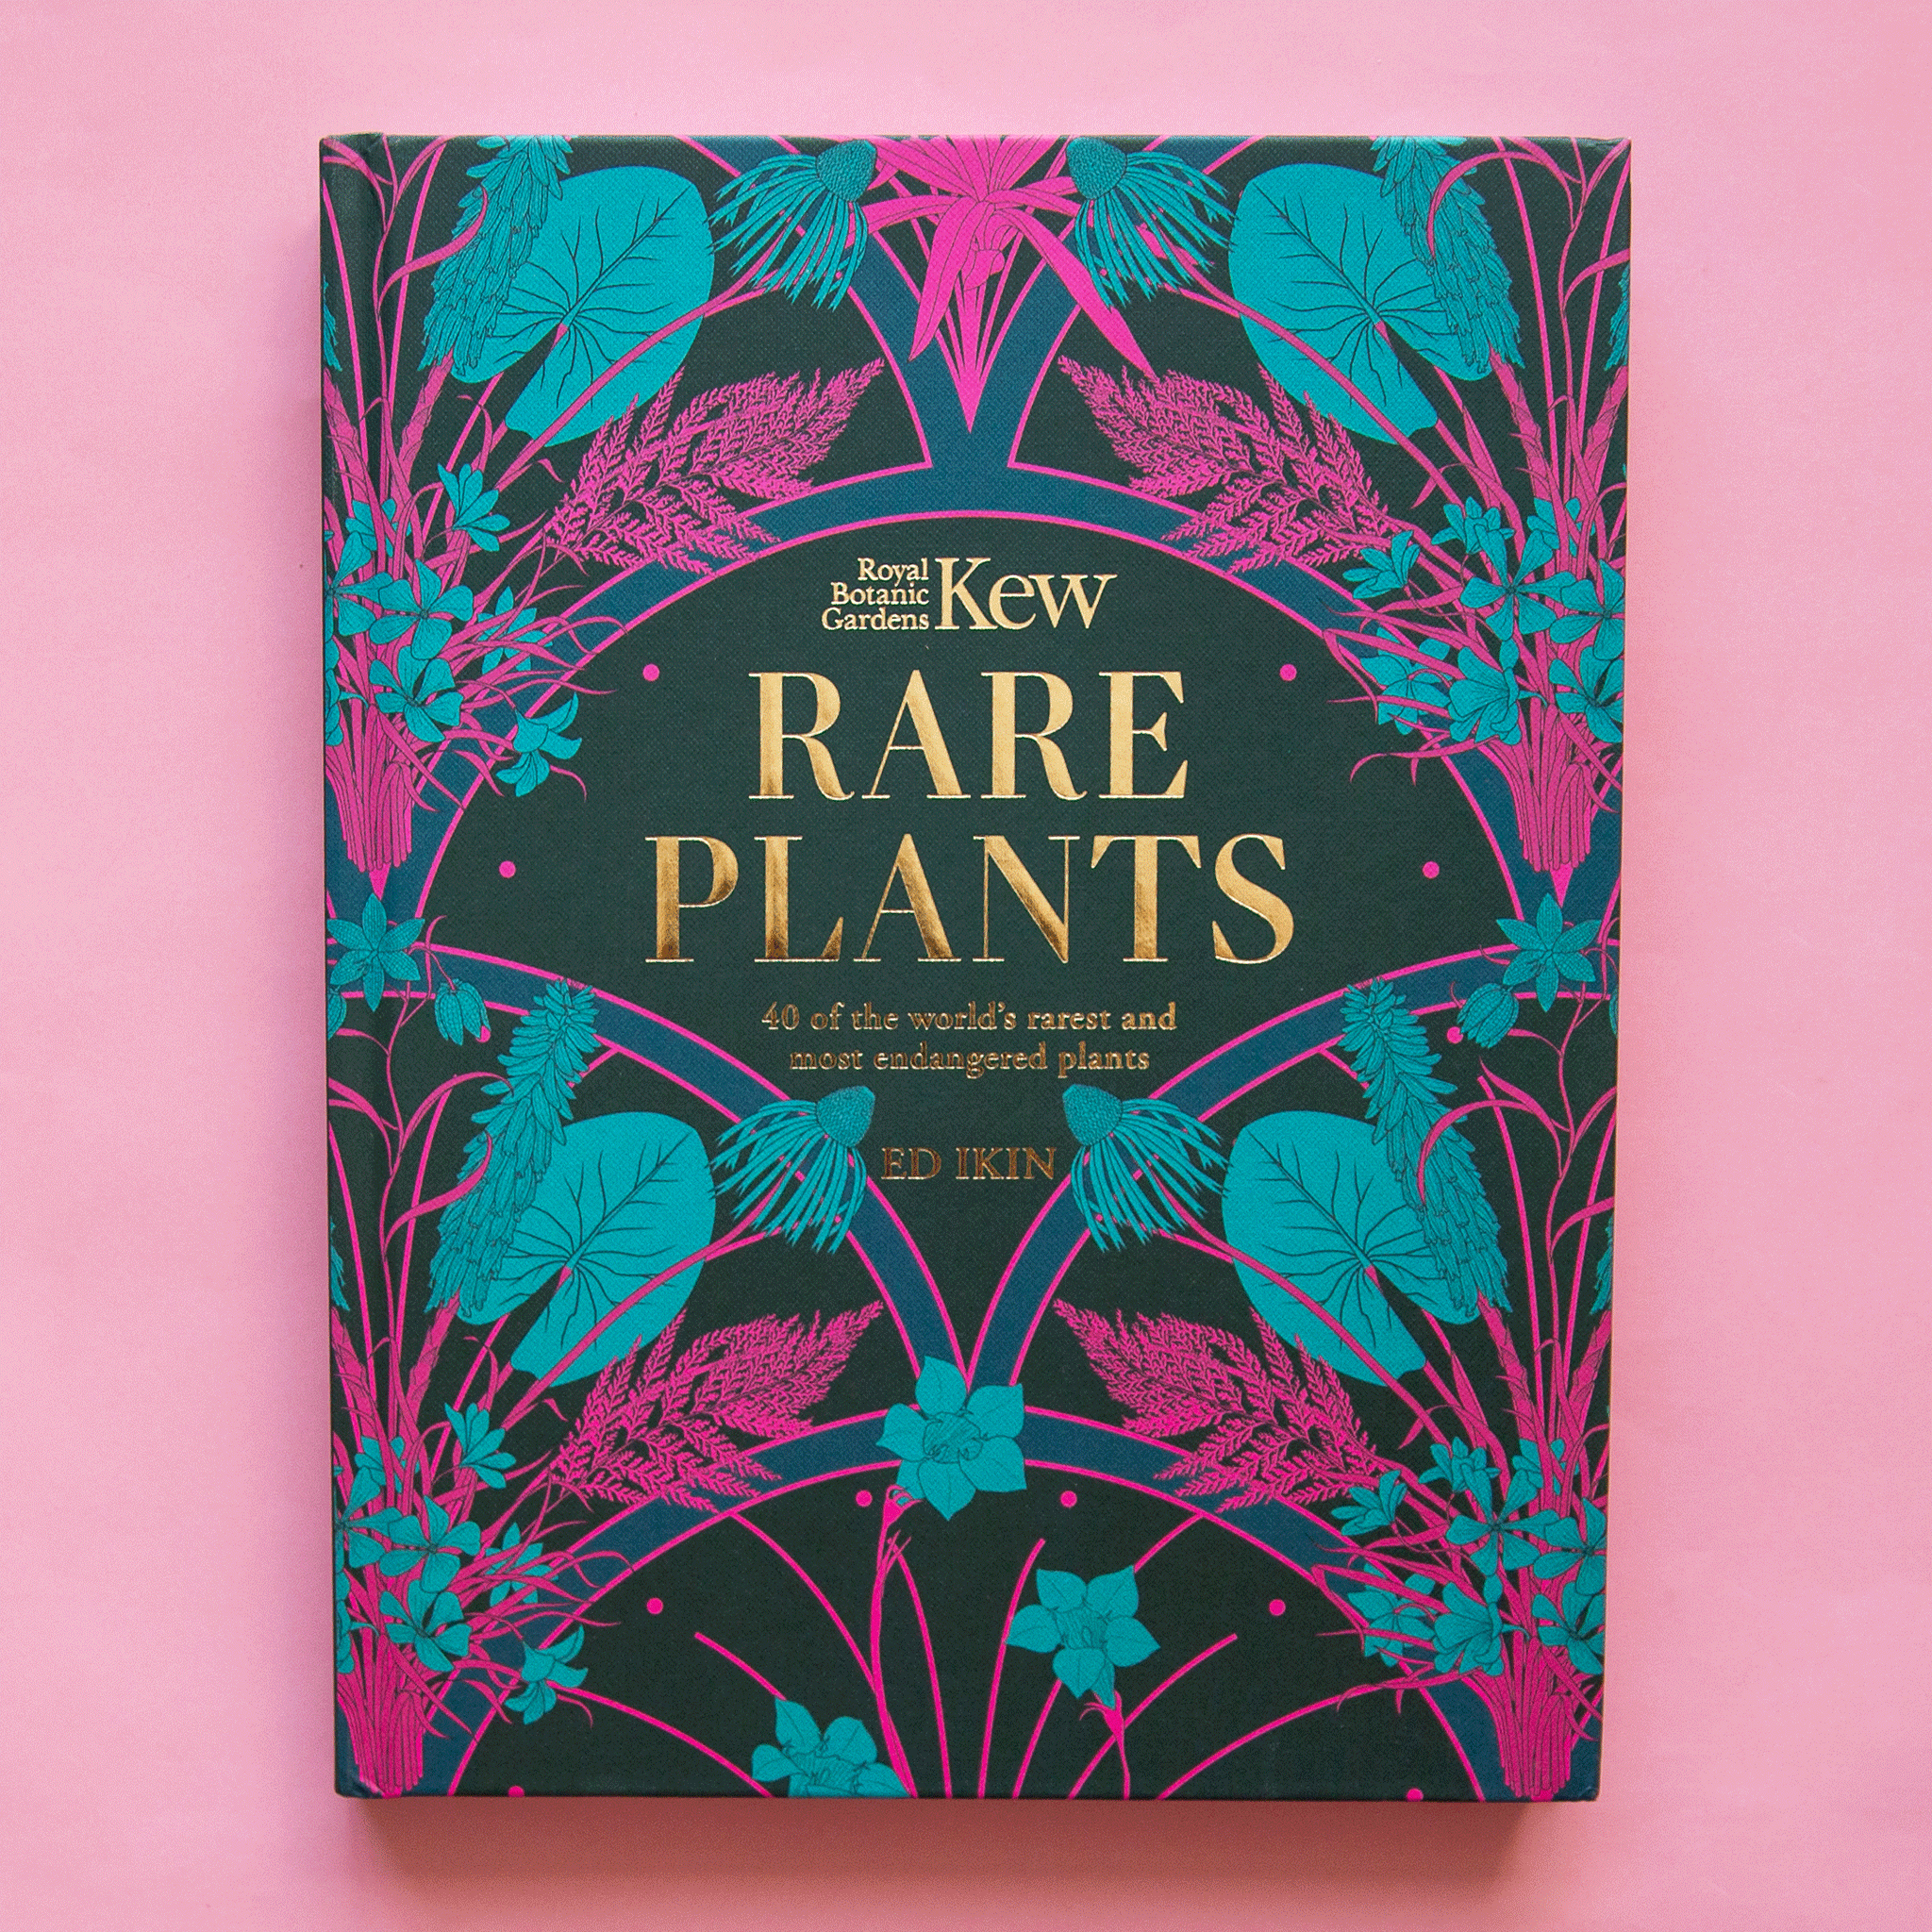 On a pink background is a dark green book cover with a blue and hot pink floral and plant print along with a gold title in the center that reads, "Kew Rare Plants". 